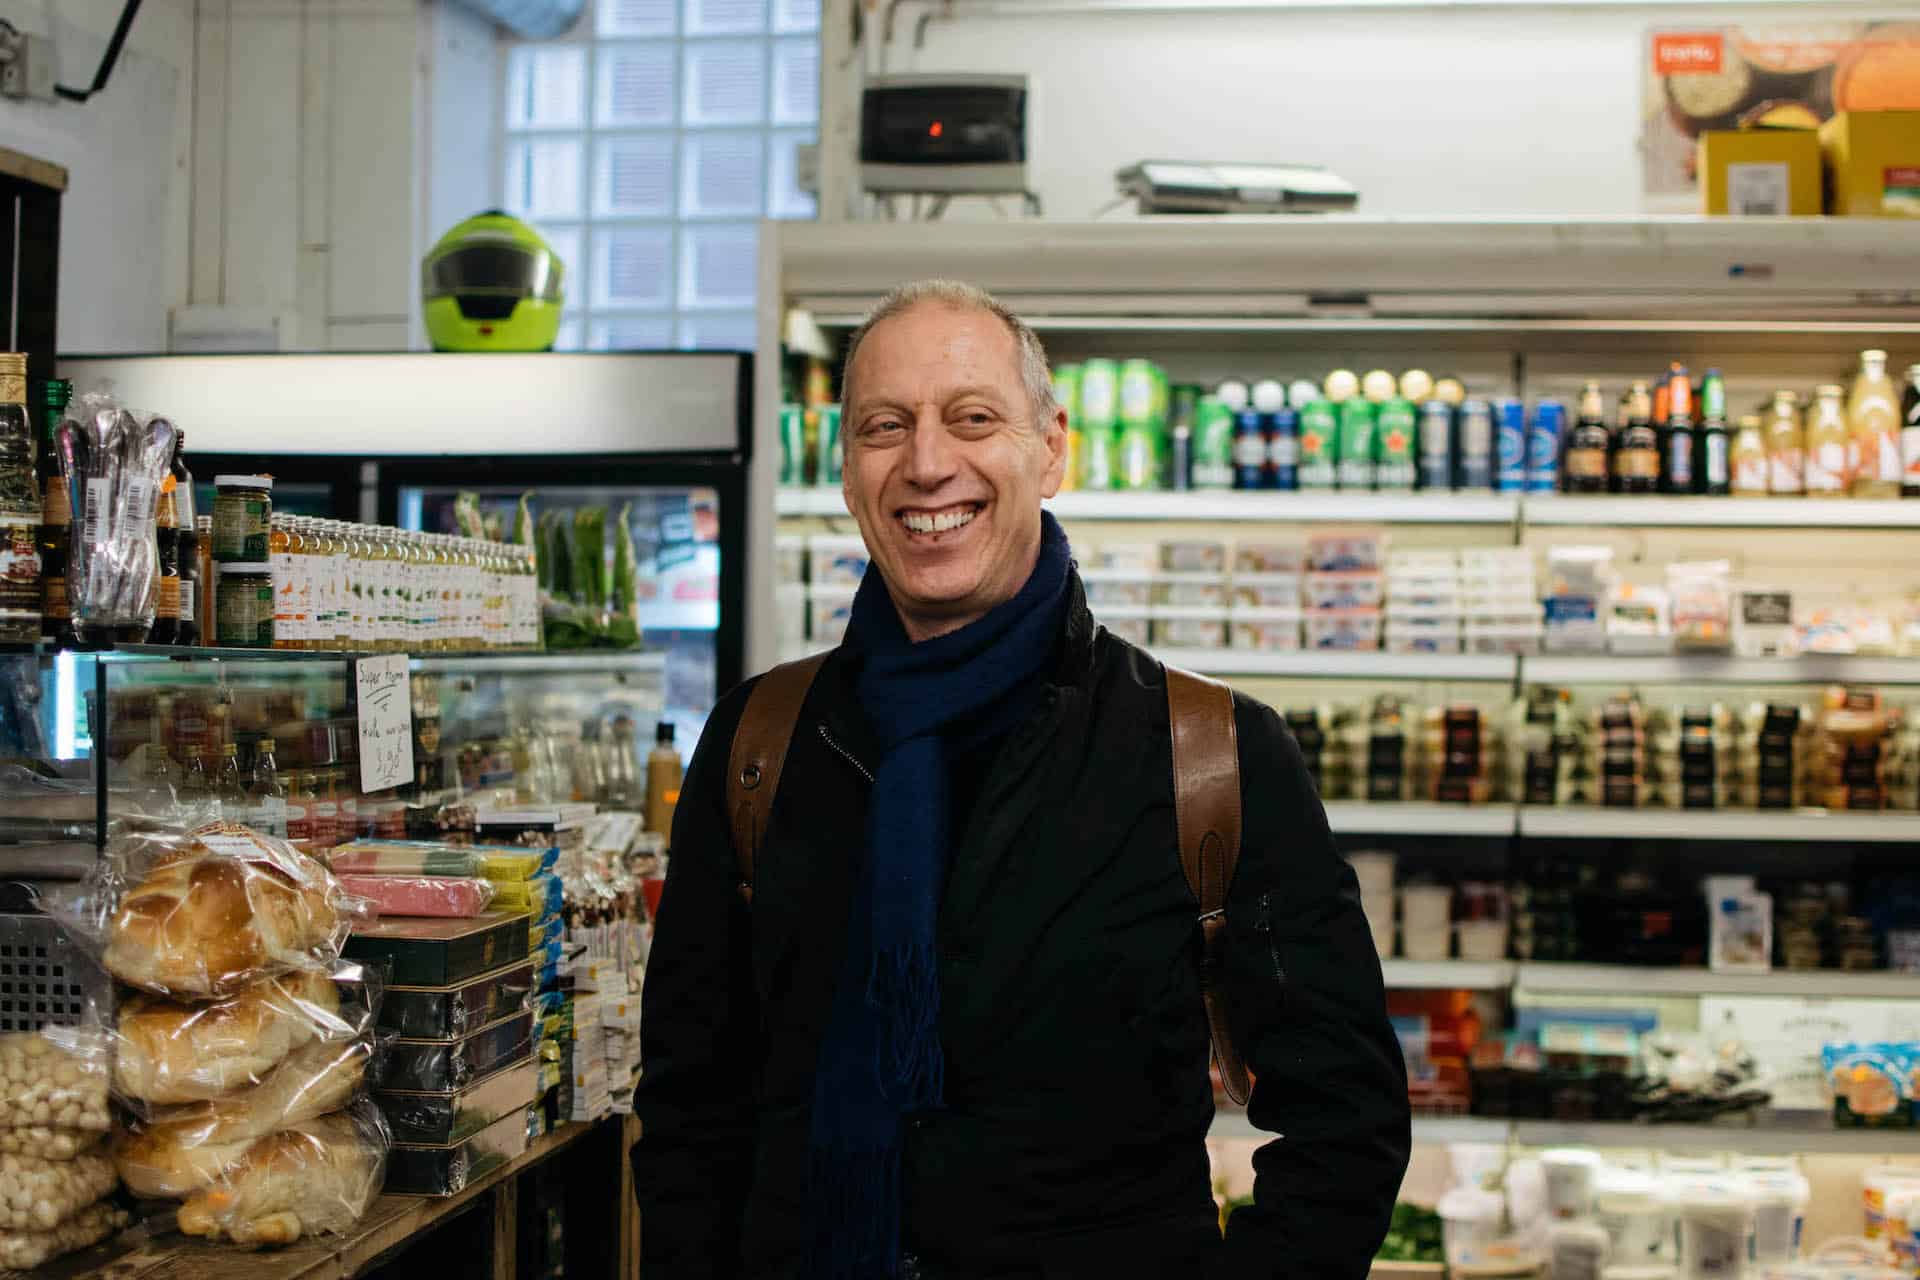 Author David Lebovitz standing in a small grocery store. He is wearing a dark coat and scarf and a brown leather backpack. He has short gray hair and is smiling while looking to the right of the frame.